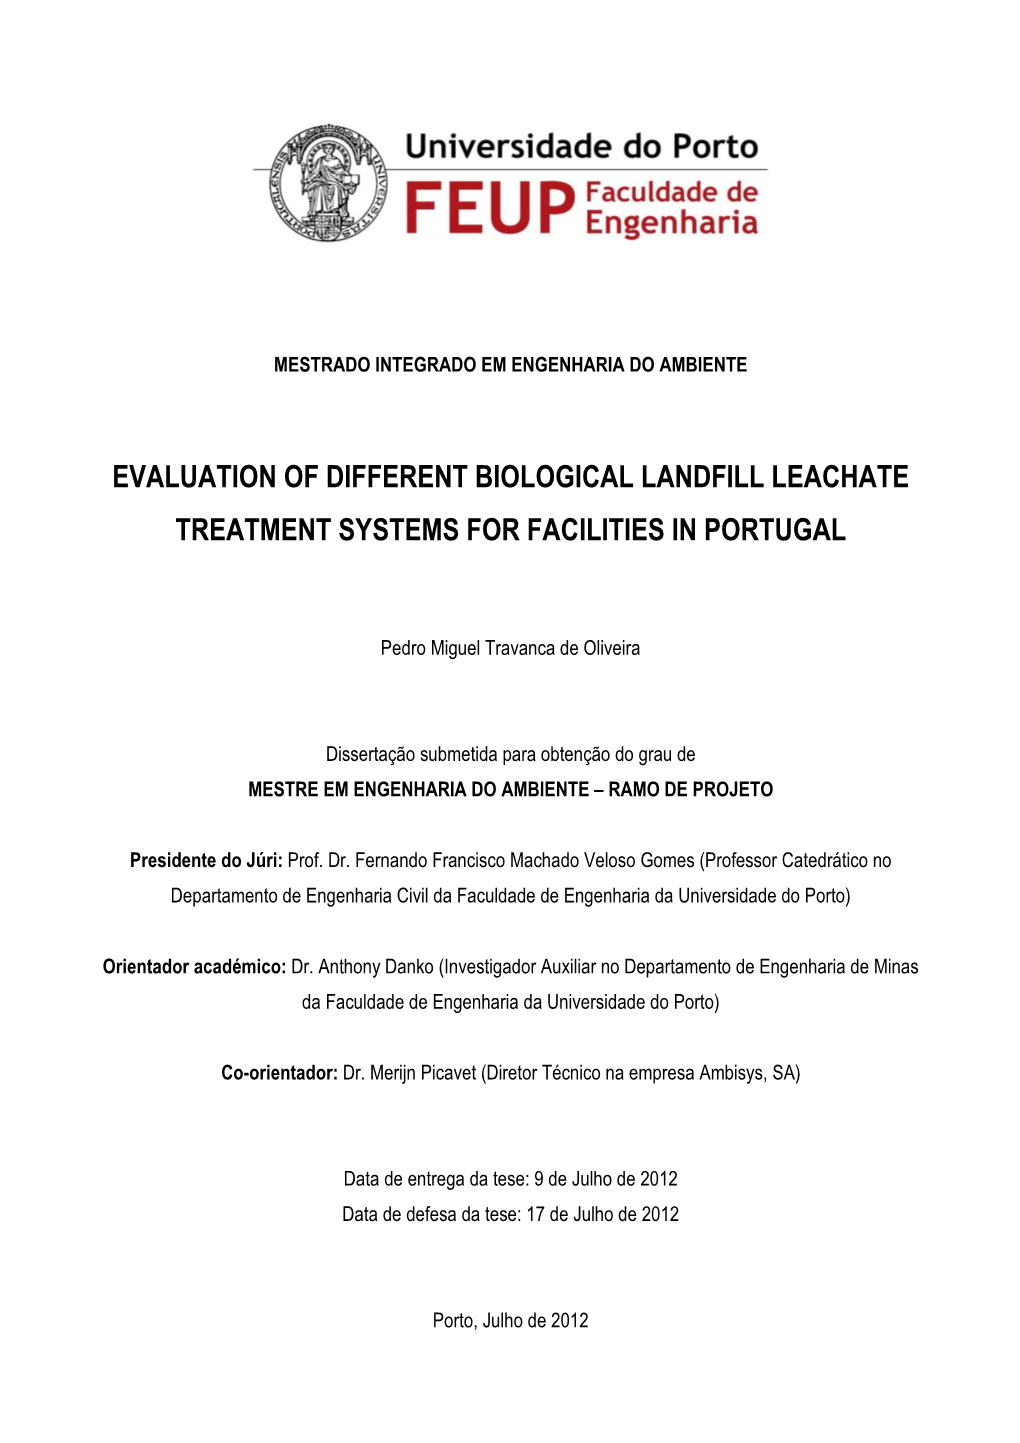 Evaluation of Different Biological Landfill Leachate Treatment Systems for Facilities in Portugal